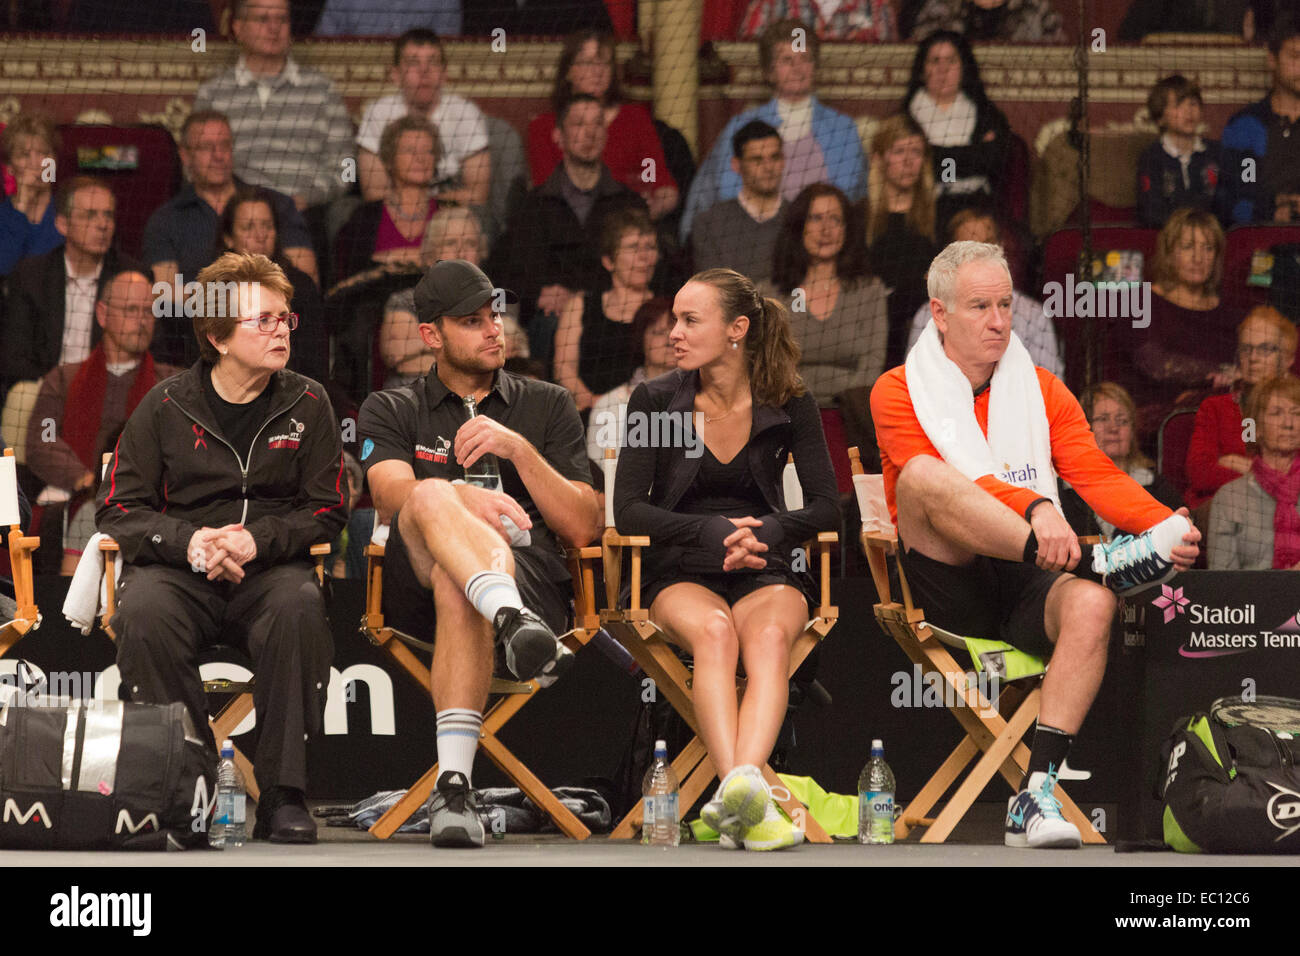 London, UK. 7 December 2014. L-R: Billie Jean King, Andy Roddick, Martina Hingis and John McEnroe. 22nd Mylan World Team Tennis Smash Hits, taking place at the Royal Albert Hall, London, for the first time. Event participants include Team Elton John: Andy Roddick, John McEnroe, Heather Watson and Martina Hingis and Team Billie Jean: Kim Clijsters, Sabine Lisicki, Tim Henman and Jamie Murray. The event raises money for the Elton John Aids Foundation (EJAF). The event takes place during Statoil Masters Tennis and the 2014 event was won by Team Billie Jean. Credit:  Nick Savage/Alamy Live News Stock Photo